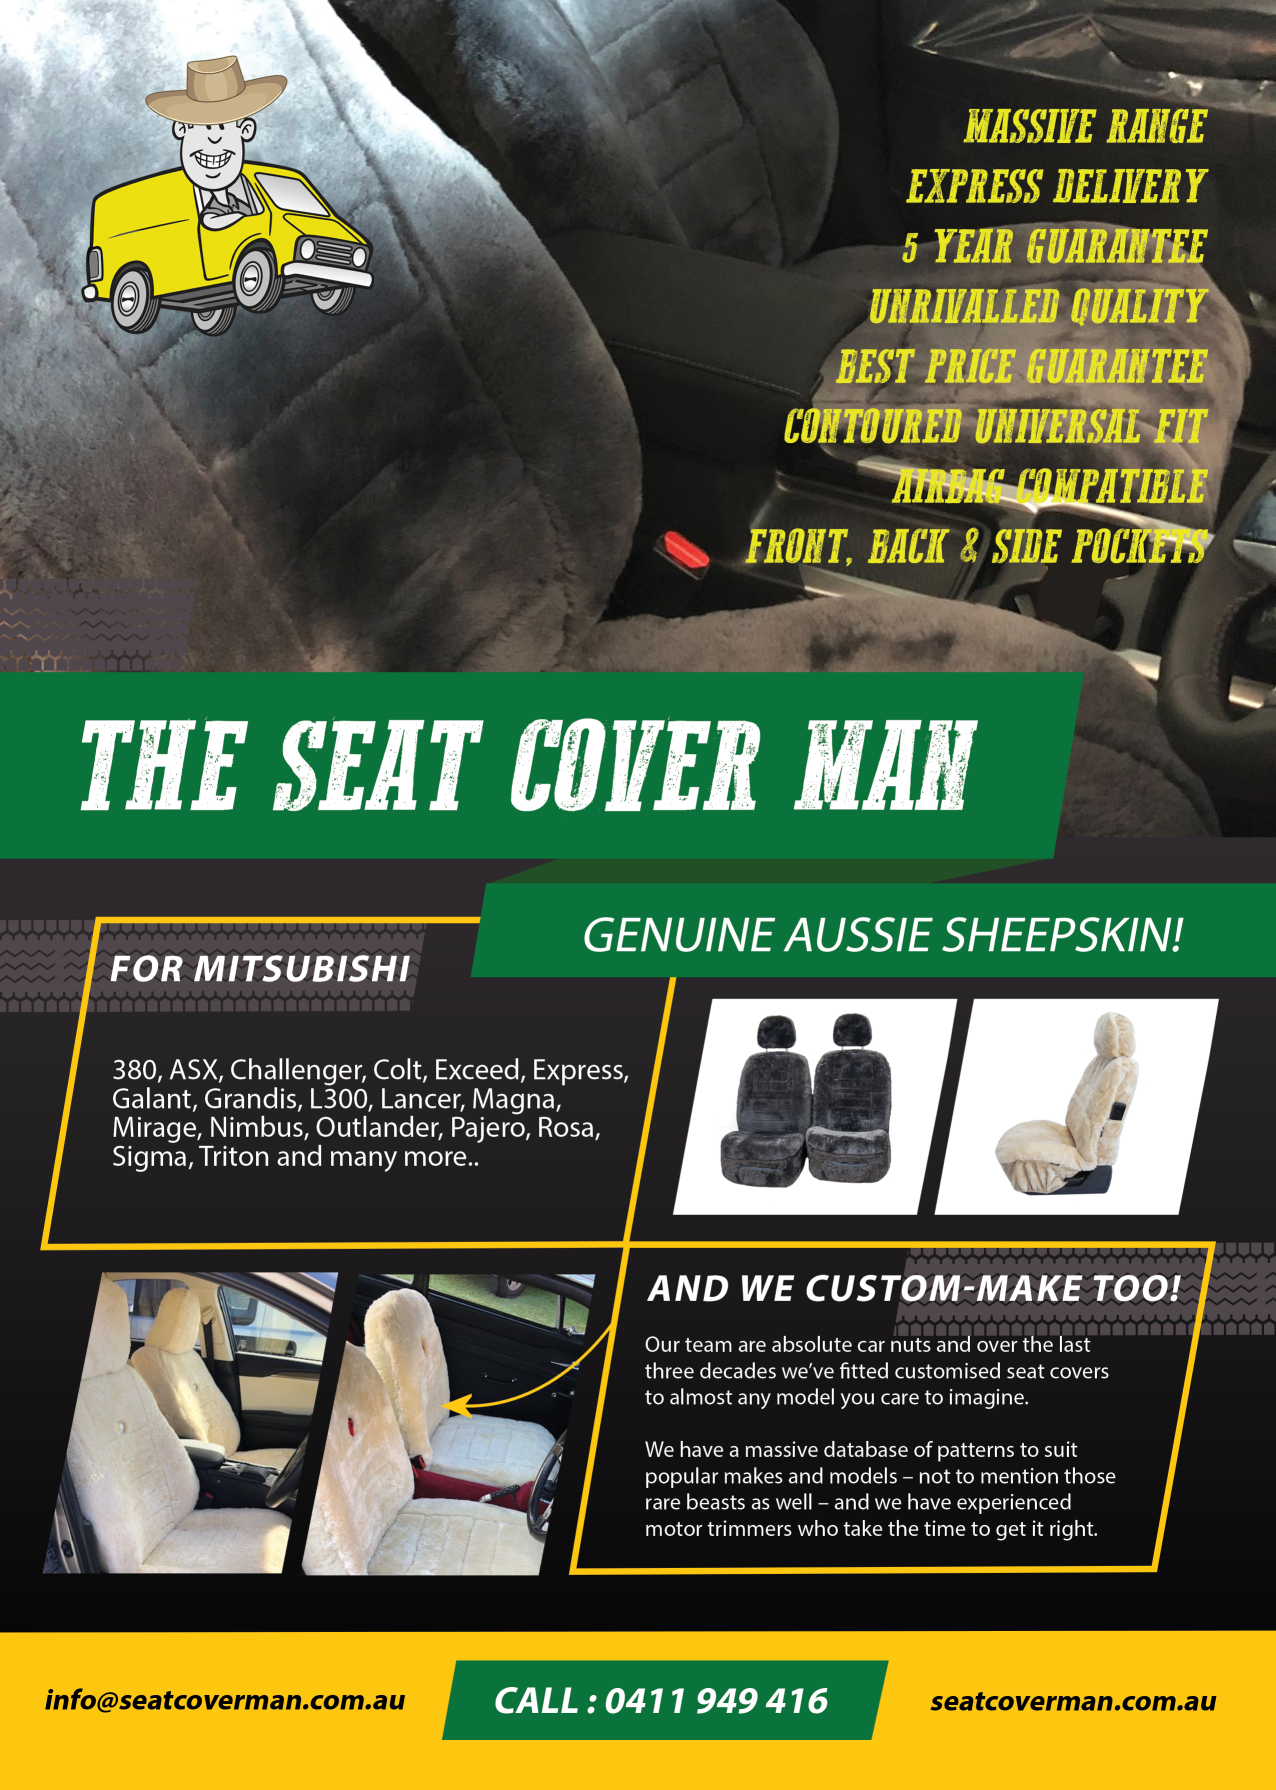 Sheepskin Seat Covers for Mitsubishi by The Seat Cover Man